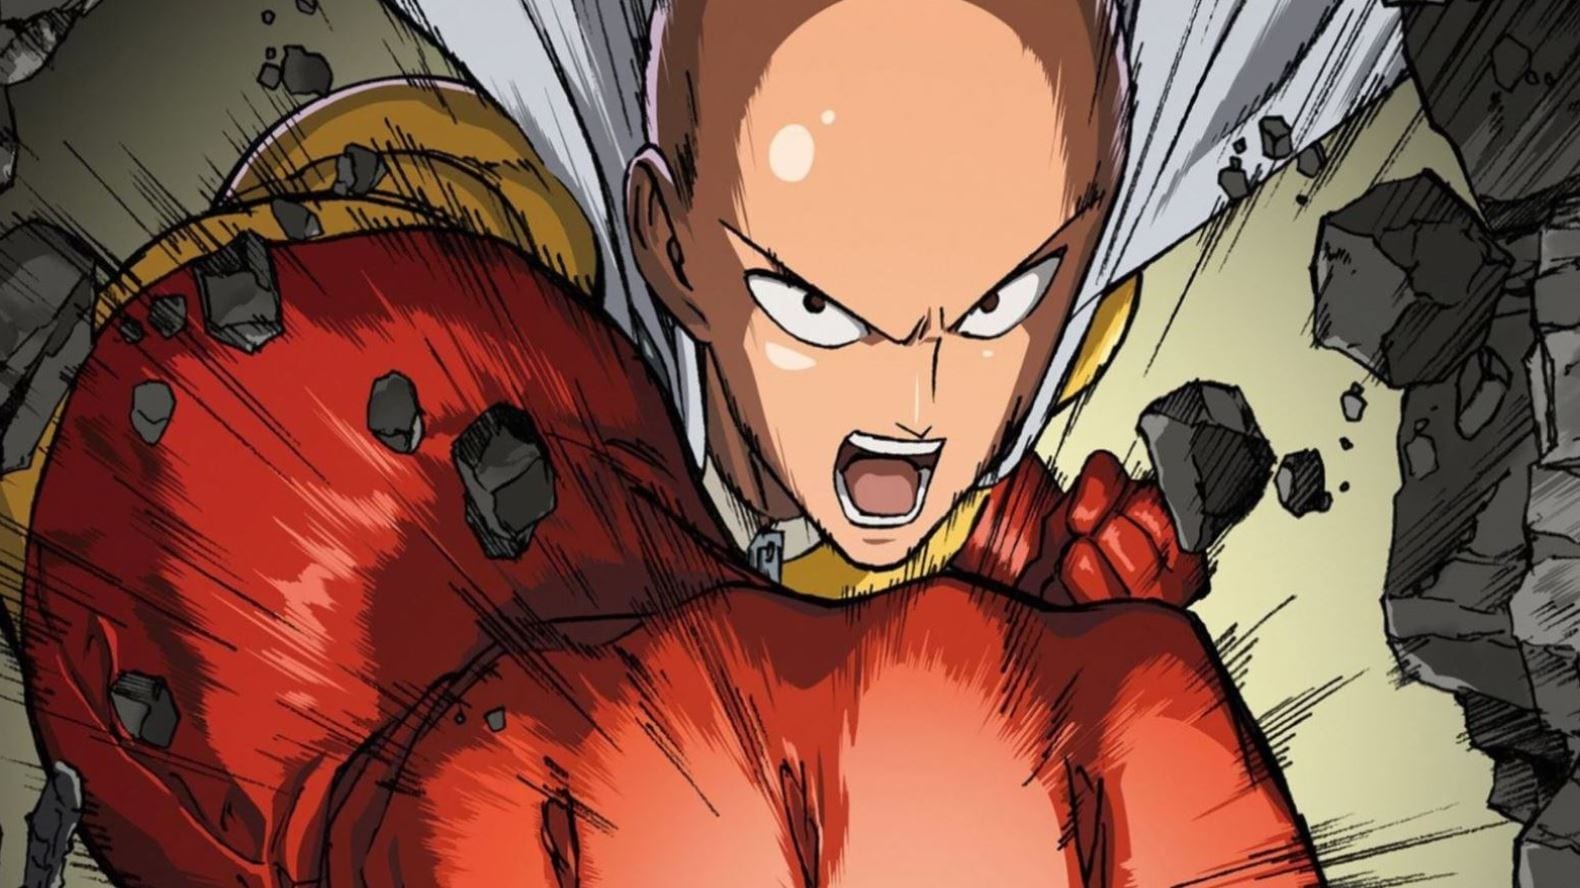 Who is the second most powerful character in the One Punch Man